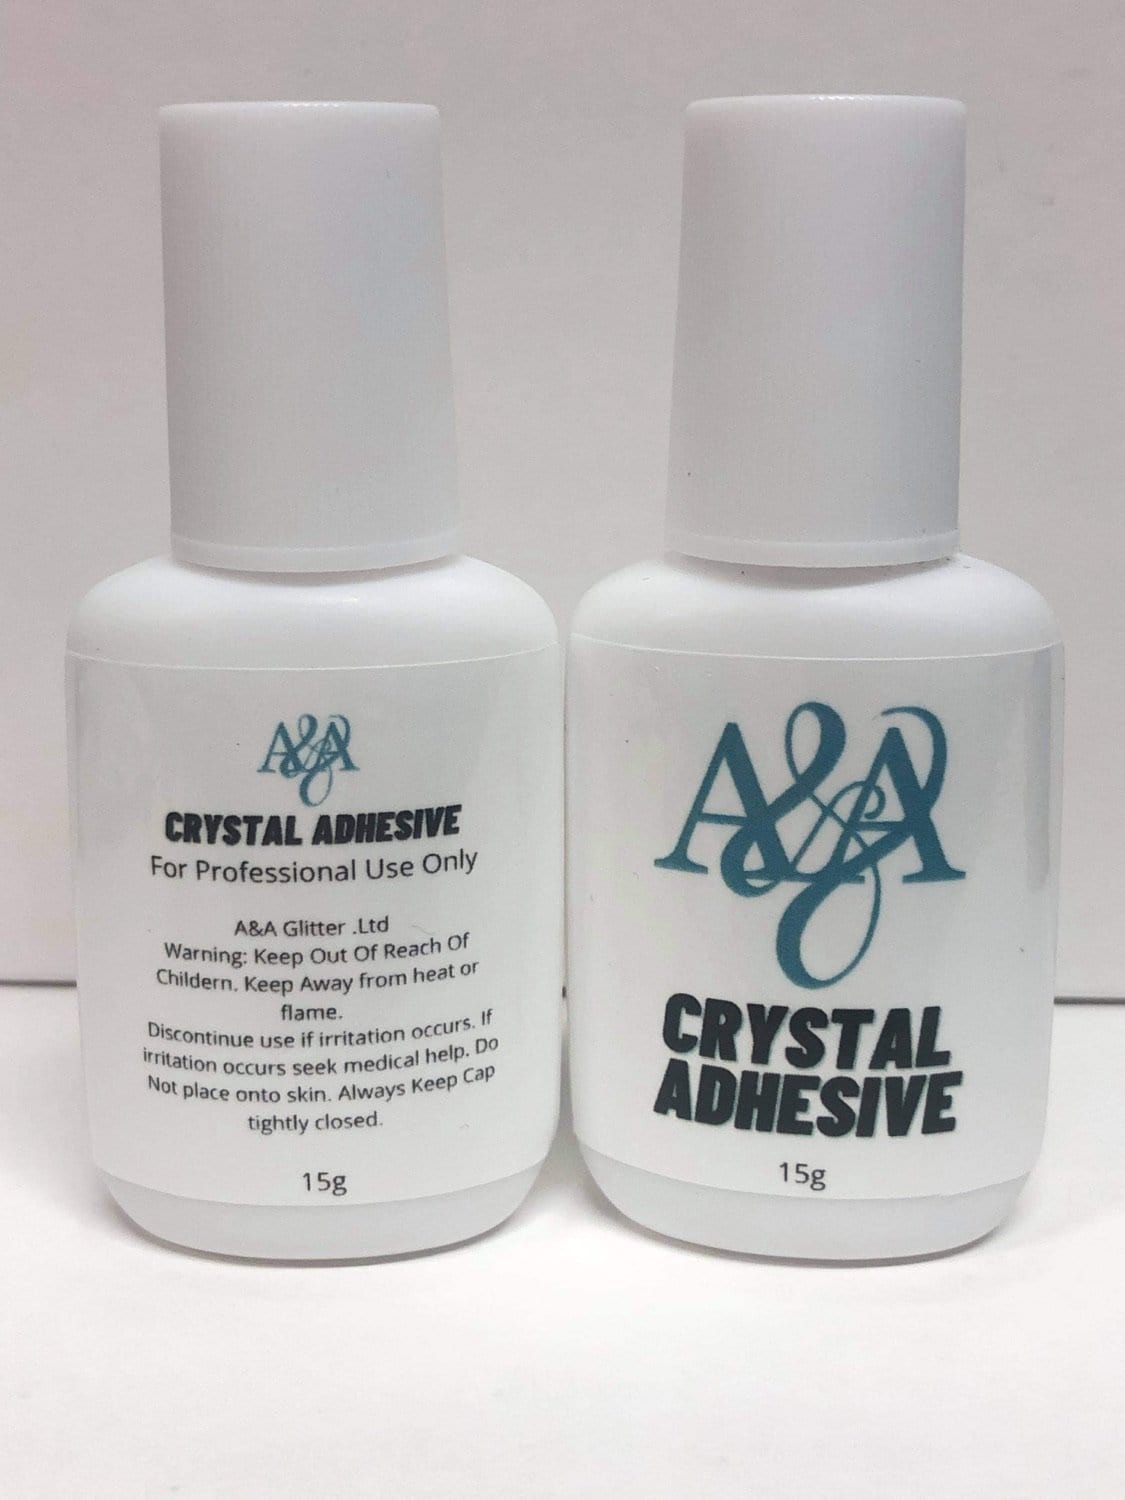 Crystal Adhesive Glue By A&A Glitter